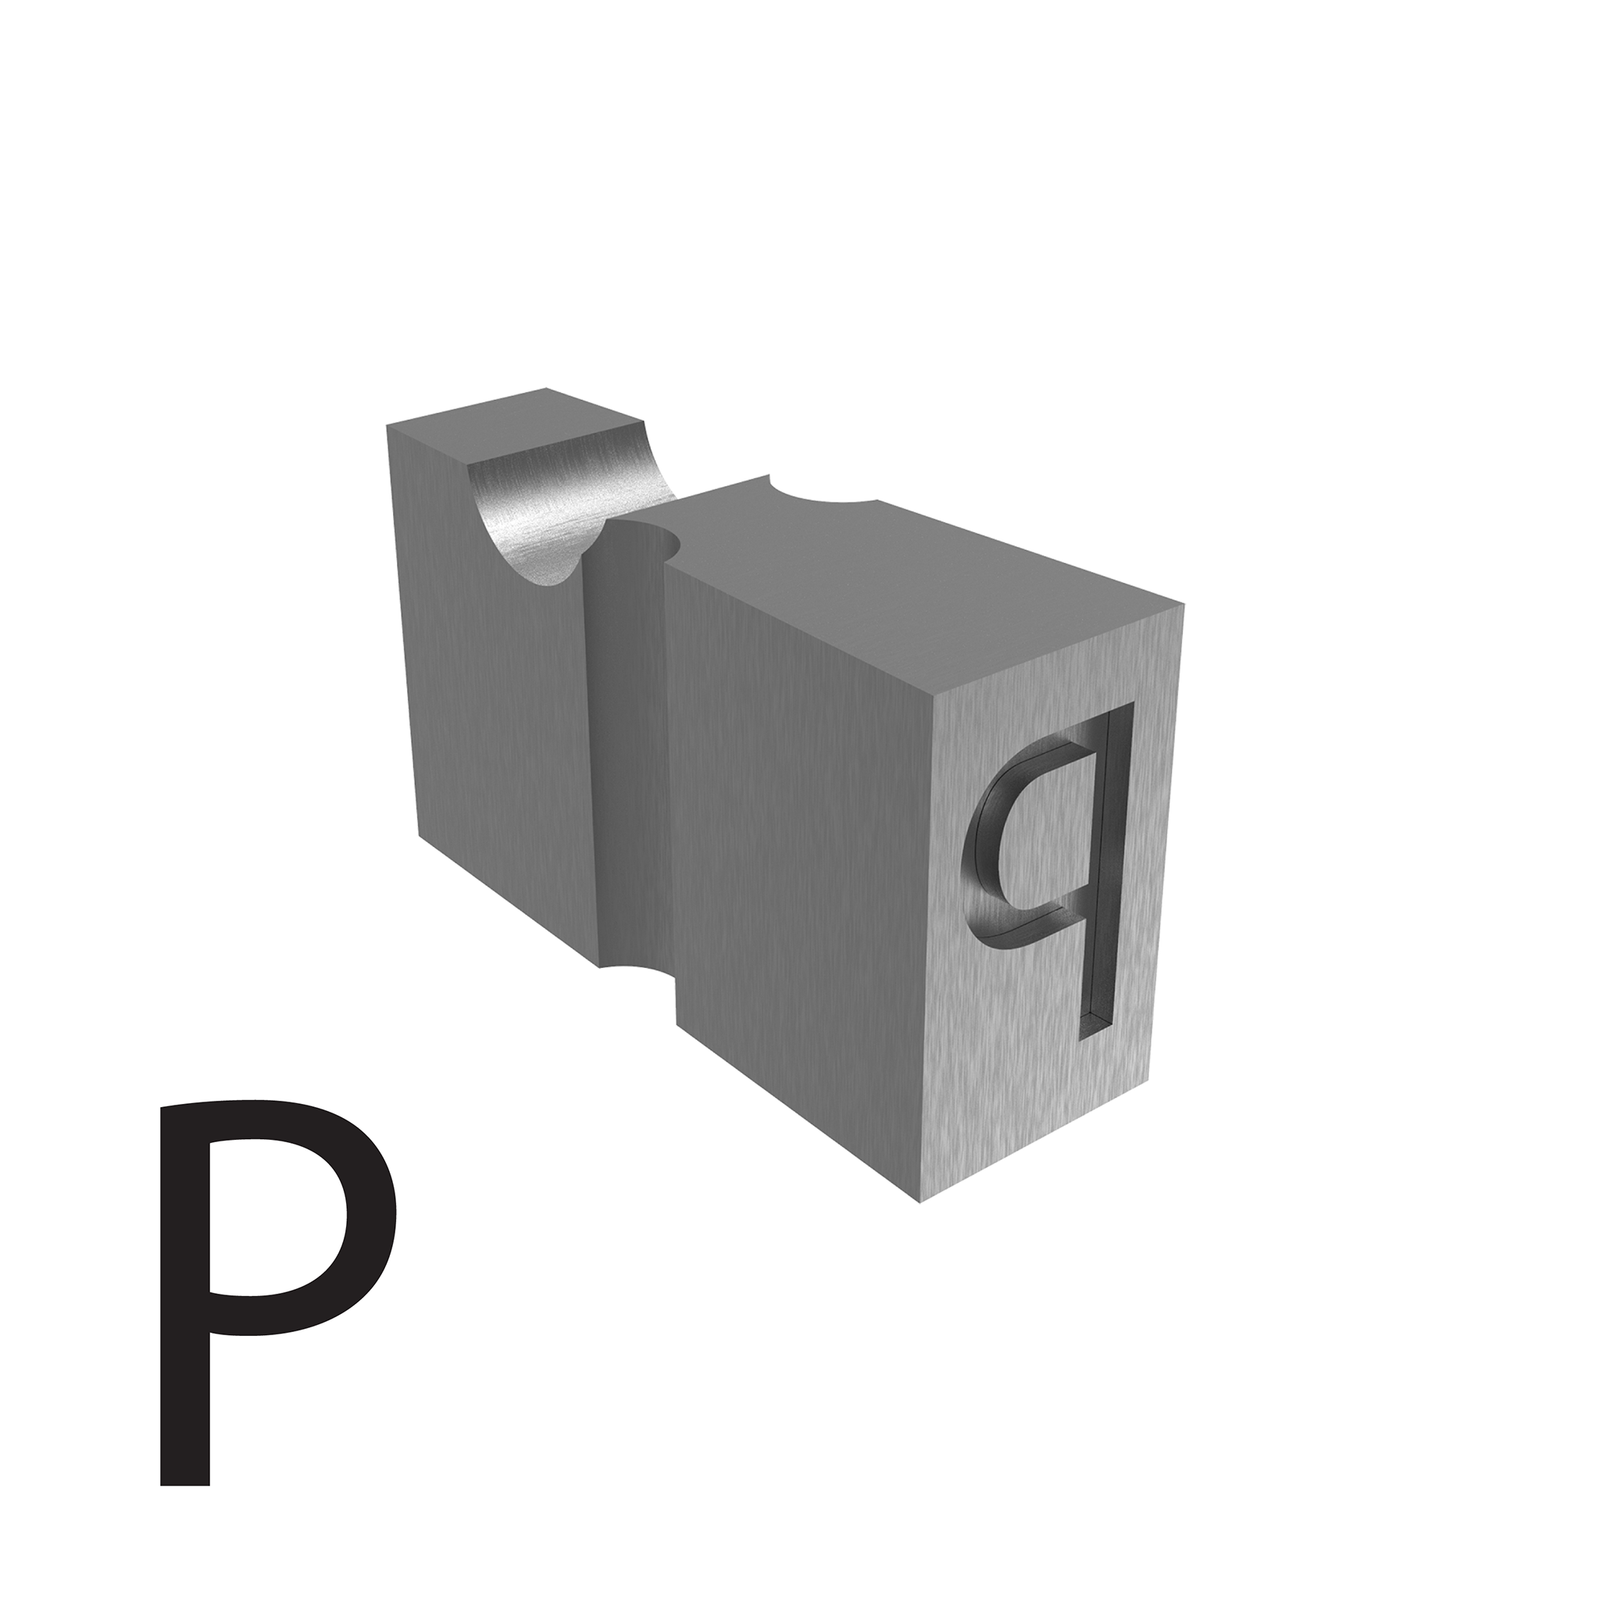 the letter P type used for embossed printing 